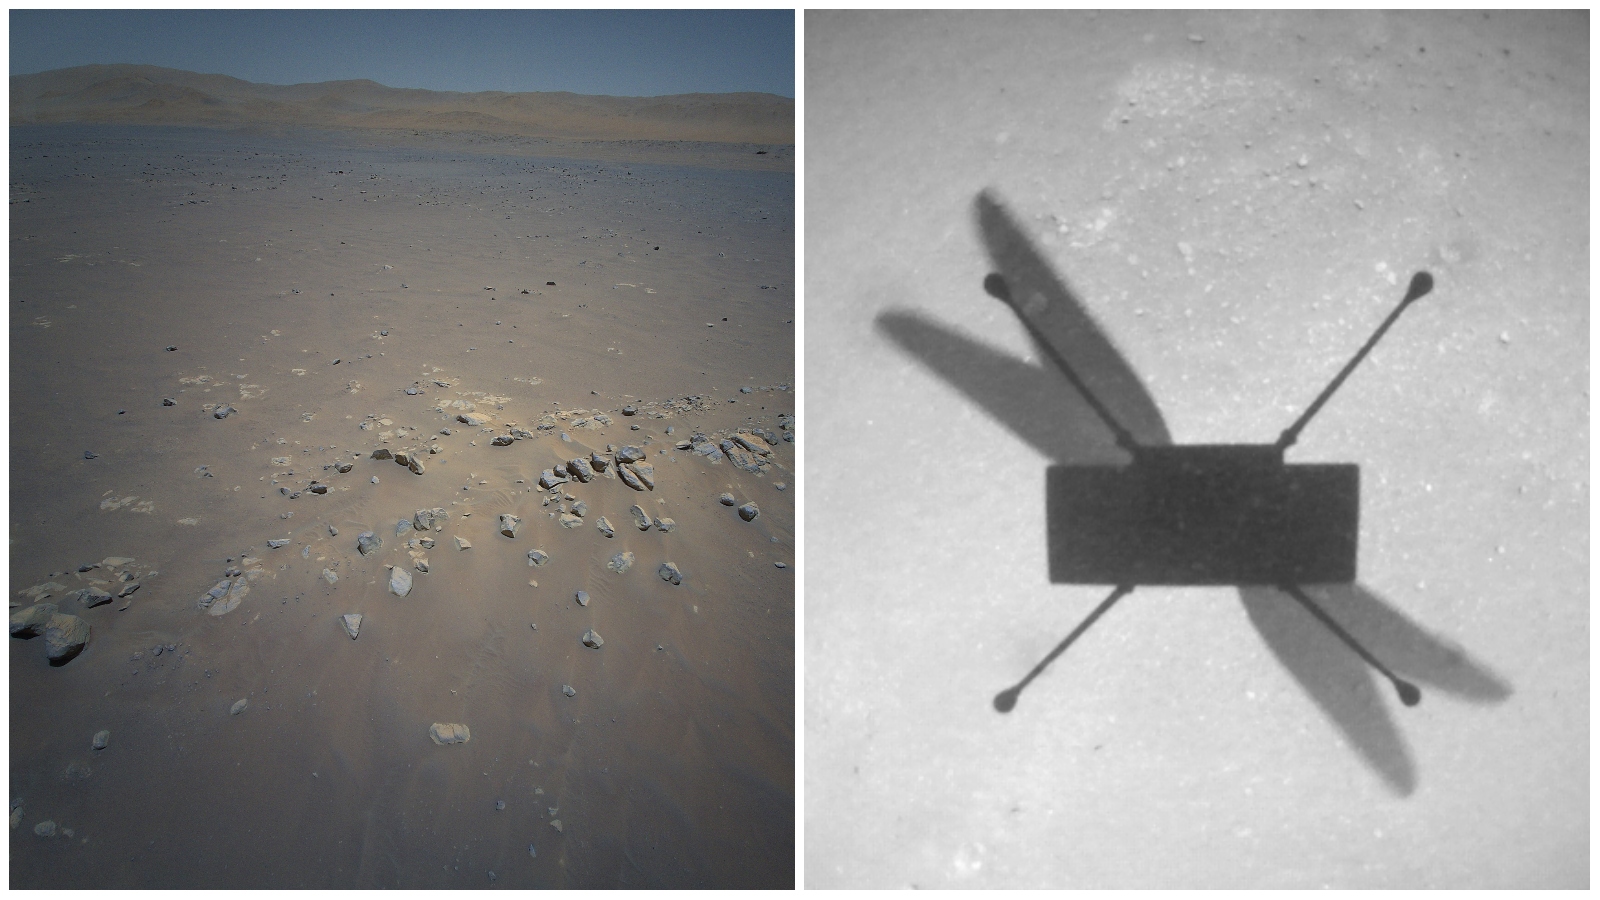 Ingenuity’s Mars Helicopter took the image on the left with its navigation camera and the image on the right with its color camera during its 10th Flight, on July 24, 2021.